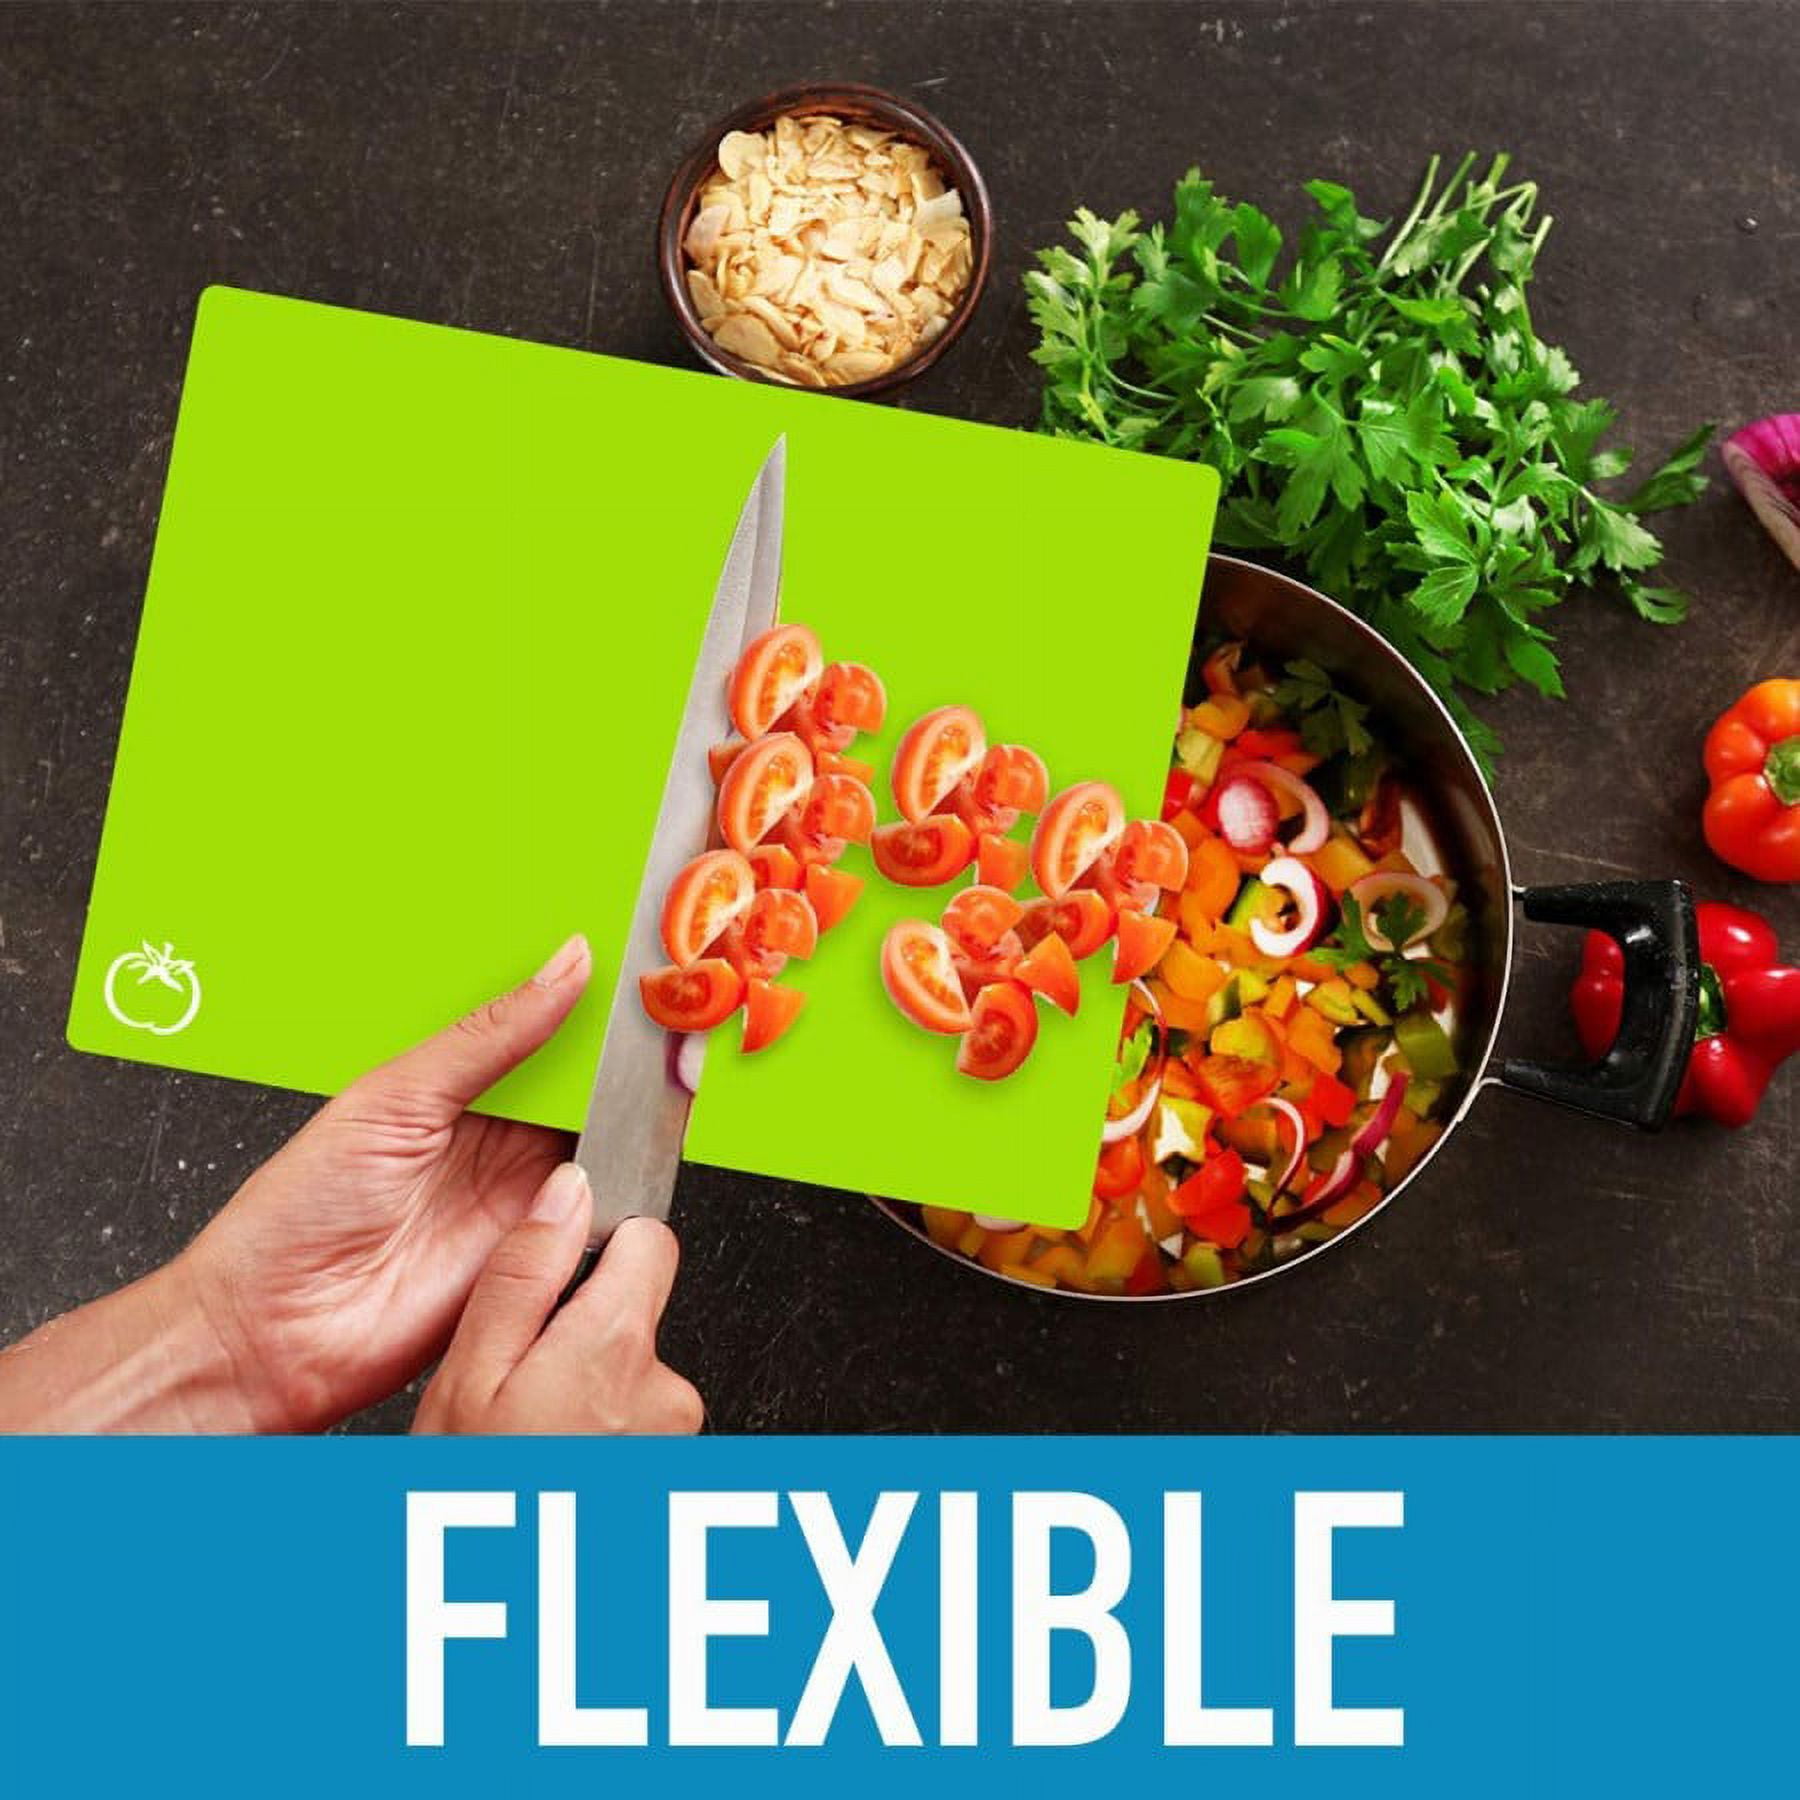 Silicone Cutting Board, Lightweight Cutting Board Mats Round Universal  Multifunctional For Vegetables For Kitchen Green ,Housewife 